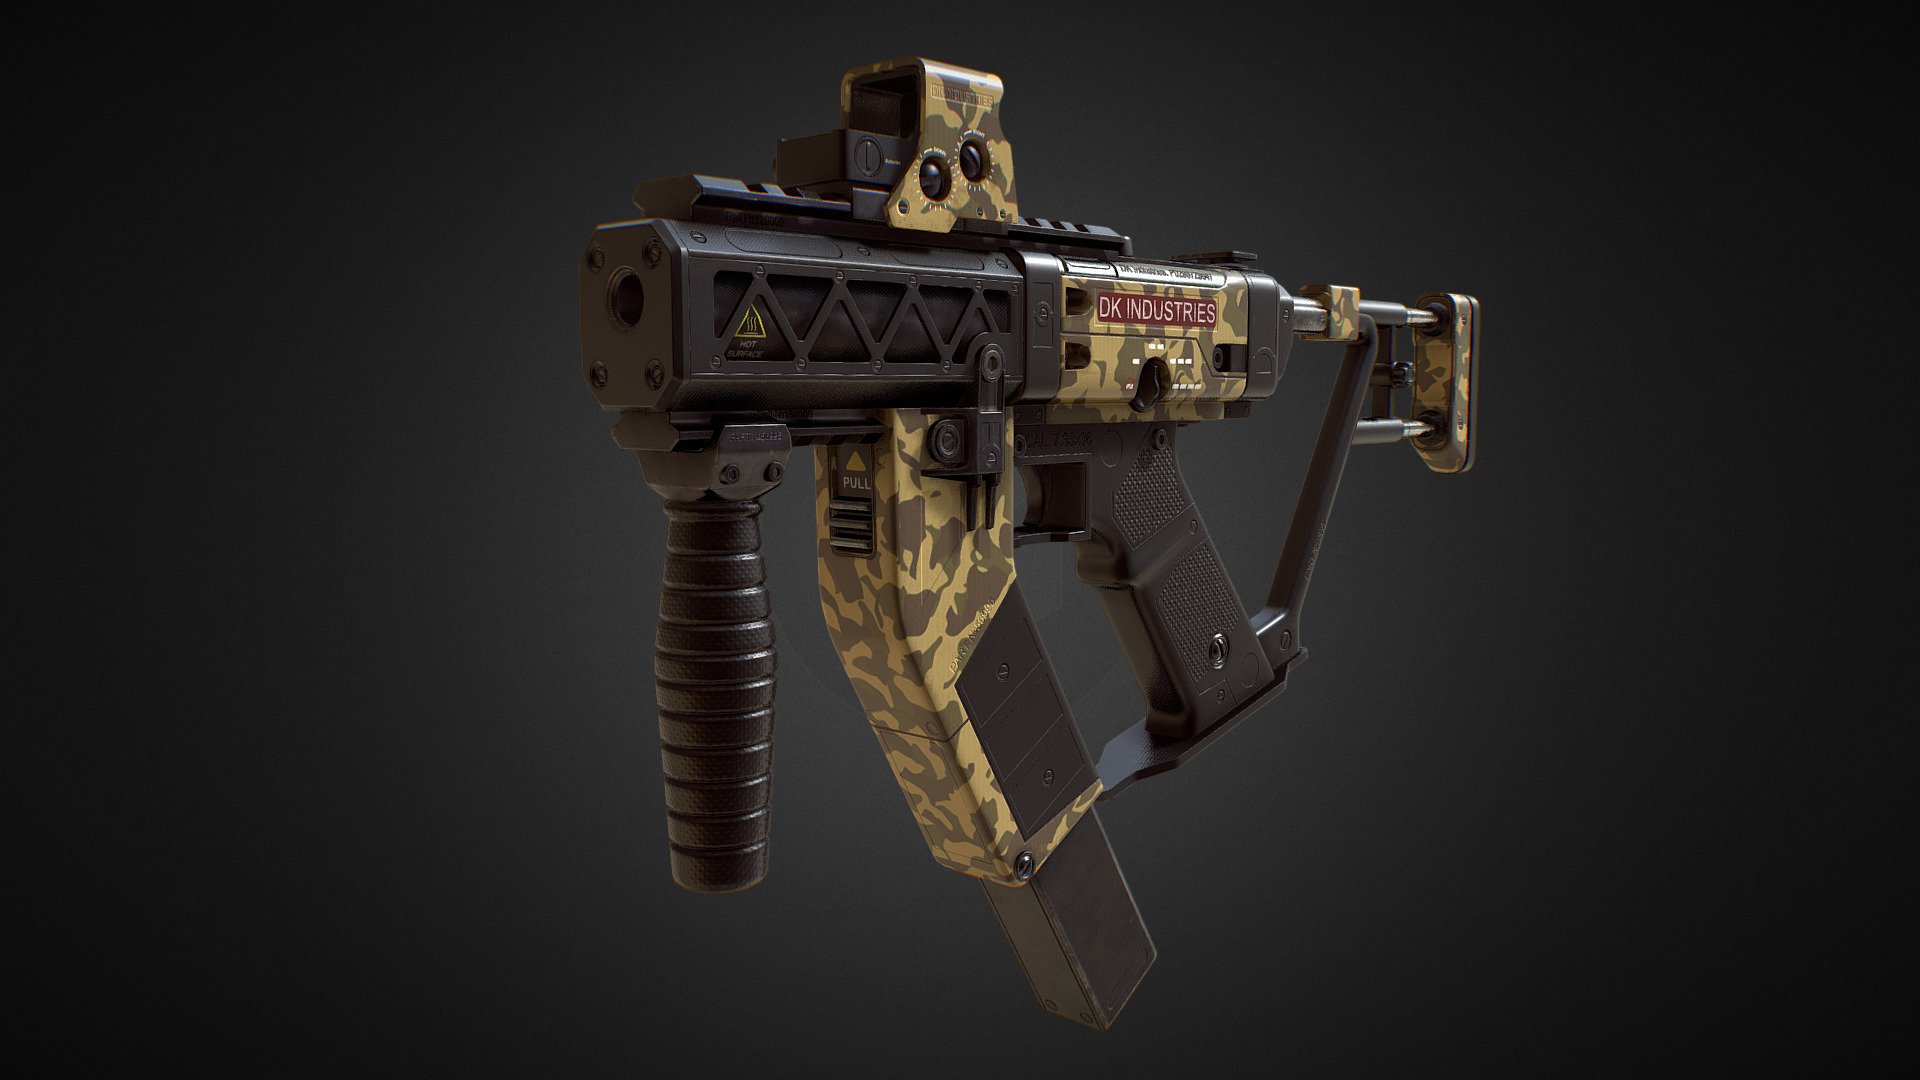 PBR Modular Pistol from Sci-Fi weapon pack 
Unity Assetstore:   PBR SciFi Weapons v2
CG trader:   PBR SciFi Weapons v2
With movable parts and hires textures - PBR Pistol (Cammo Skin 2) - 3D model by Dmitrii_Kutsenko (@Dmitrii_Kutcenko) 3d model